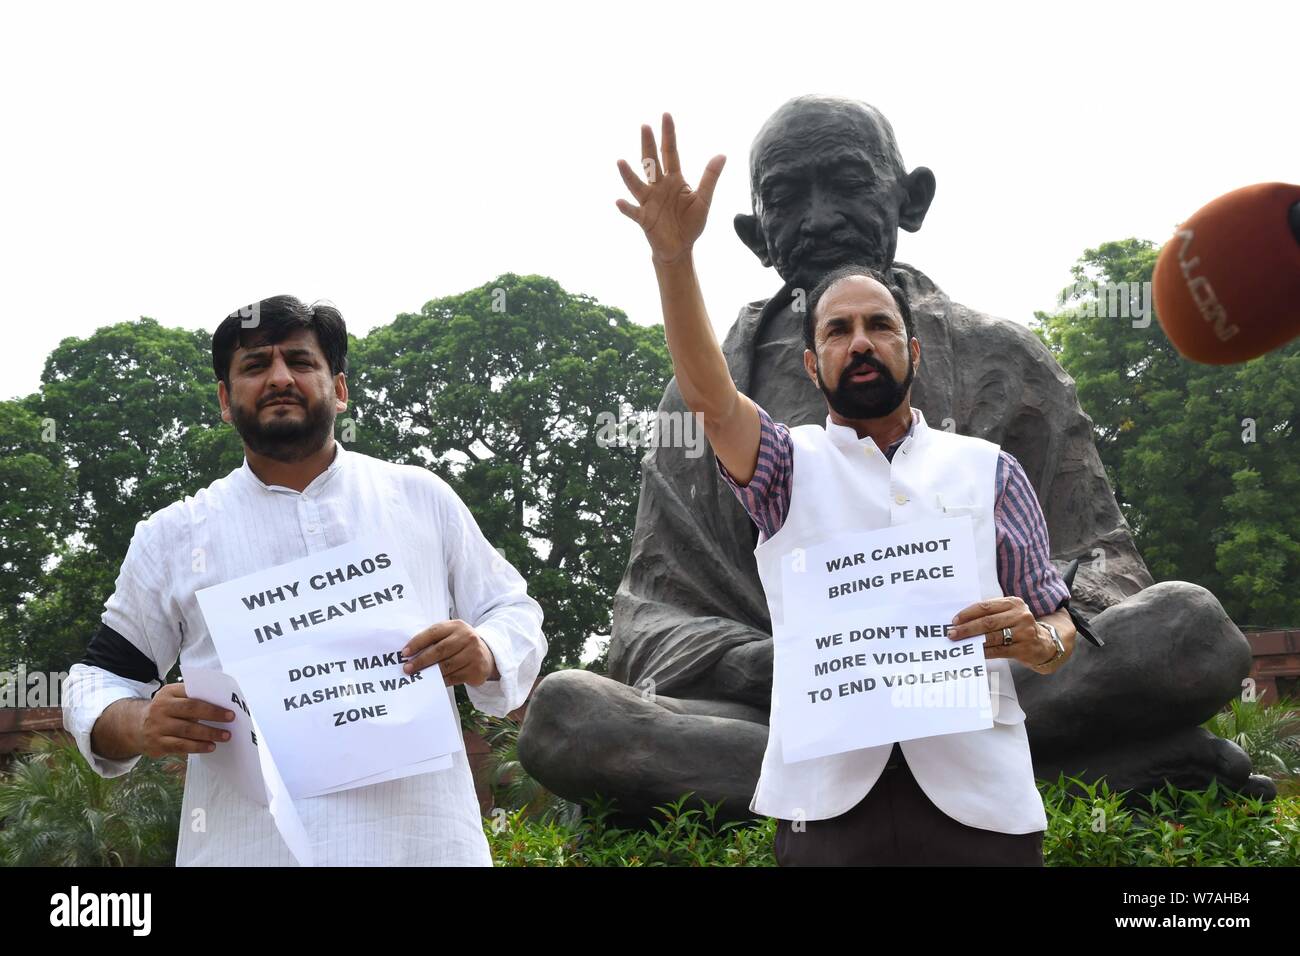 New Delhi, India. 05th Aug, 2019. PDP MP from Jammu and Kashmir Fayaz Ahmad Mir, with his clothes torn, protests against the Union governments move on Article 370, in the Parliament House complex, Credit: Jyoti Kapoor/Pacific Press/Alamy Live News Stock Photo